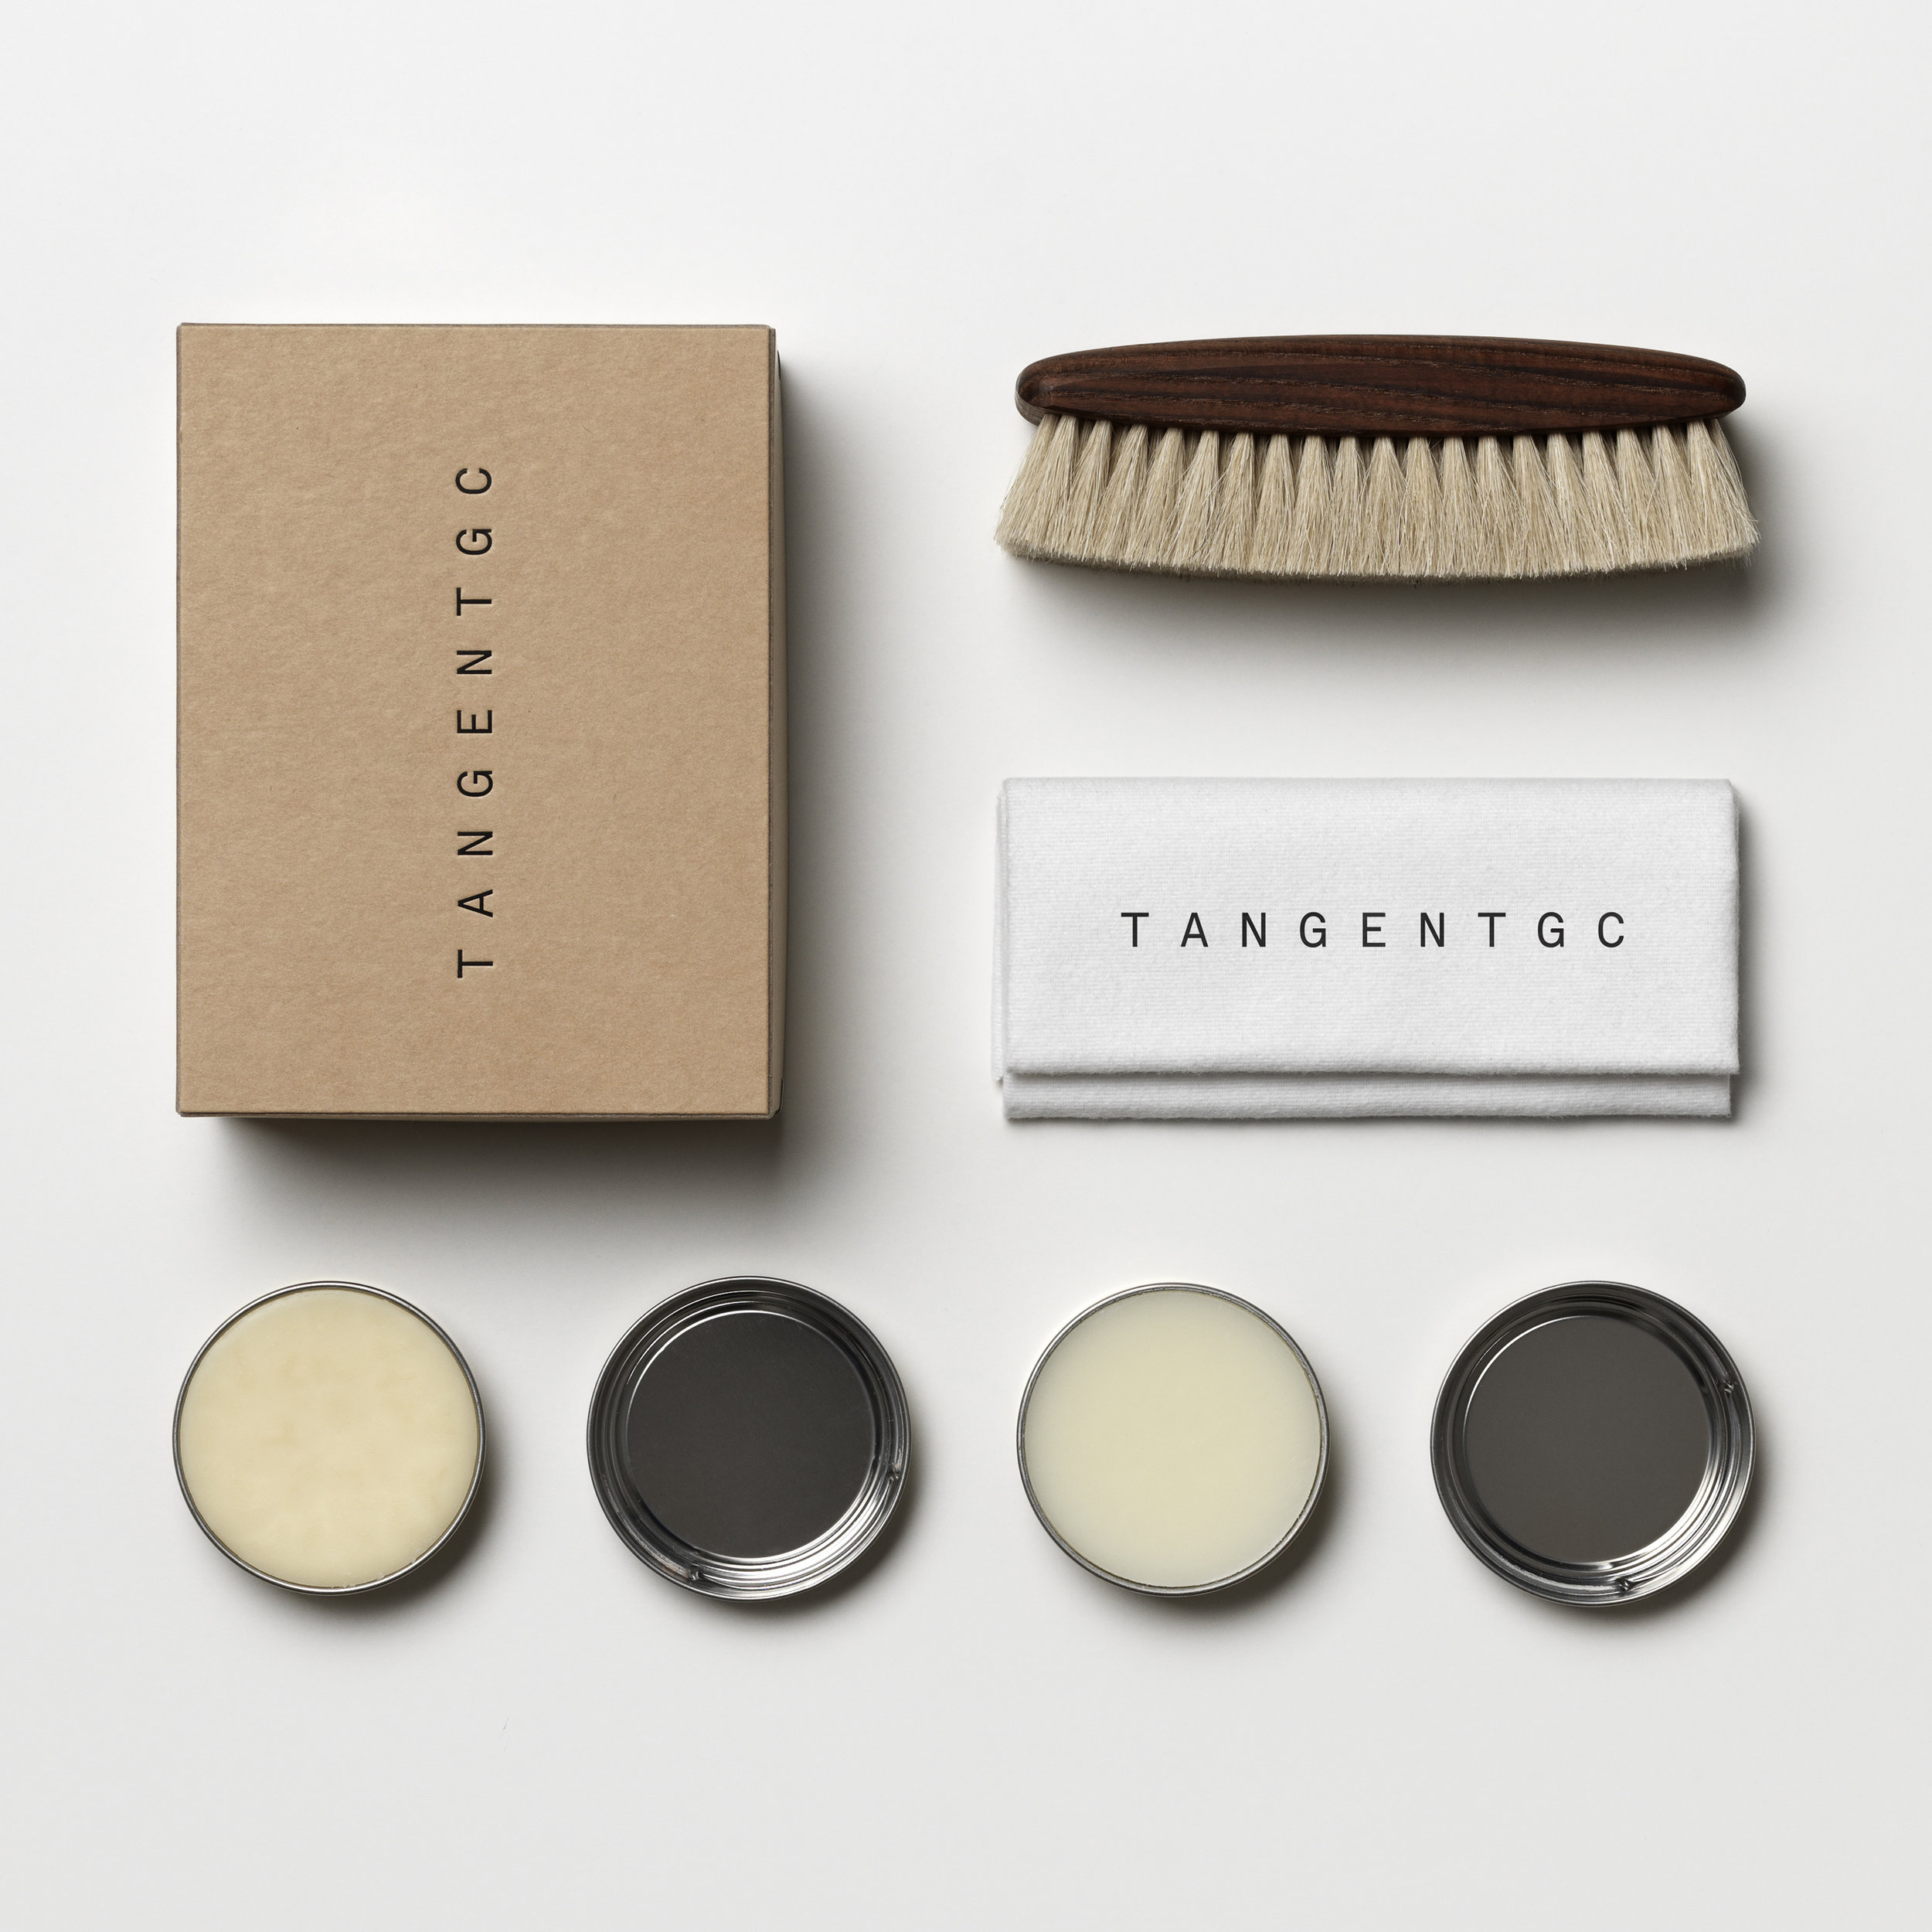 Tangent GC from Yod and Co